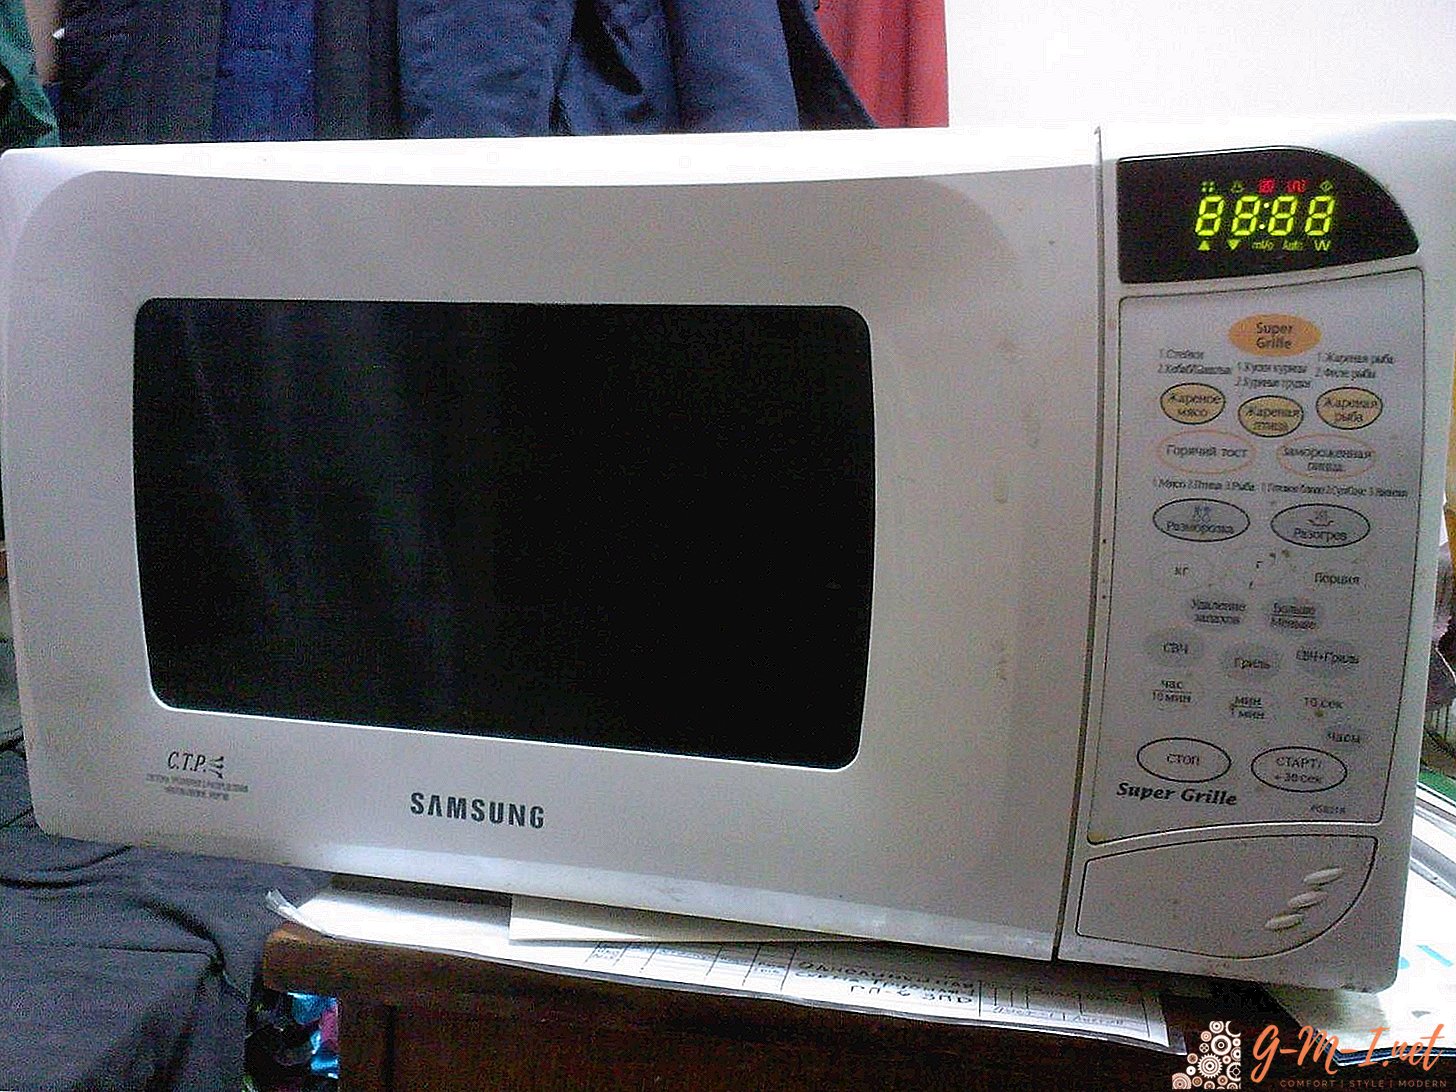 Why the microwave does not turn on